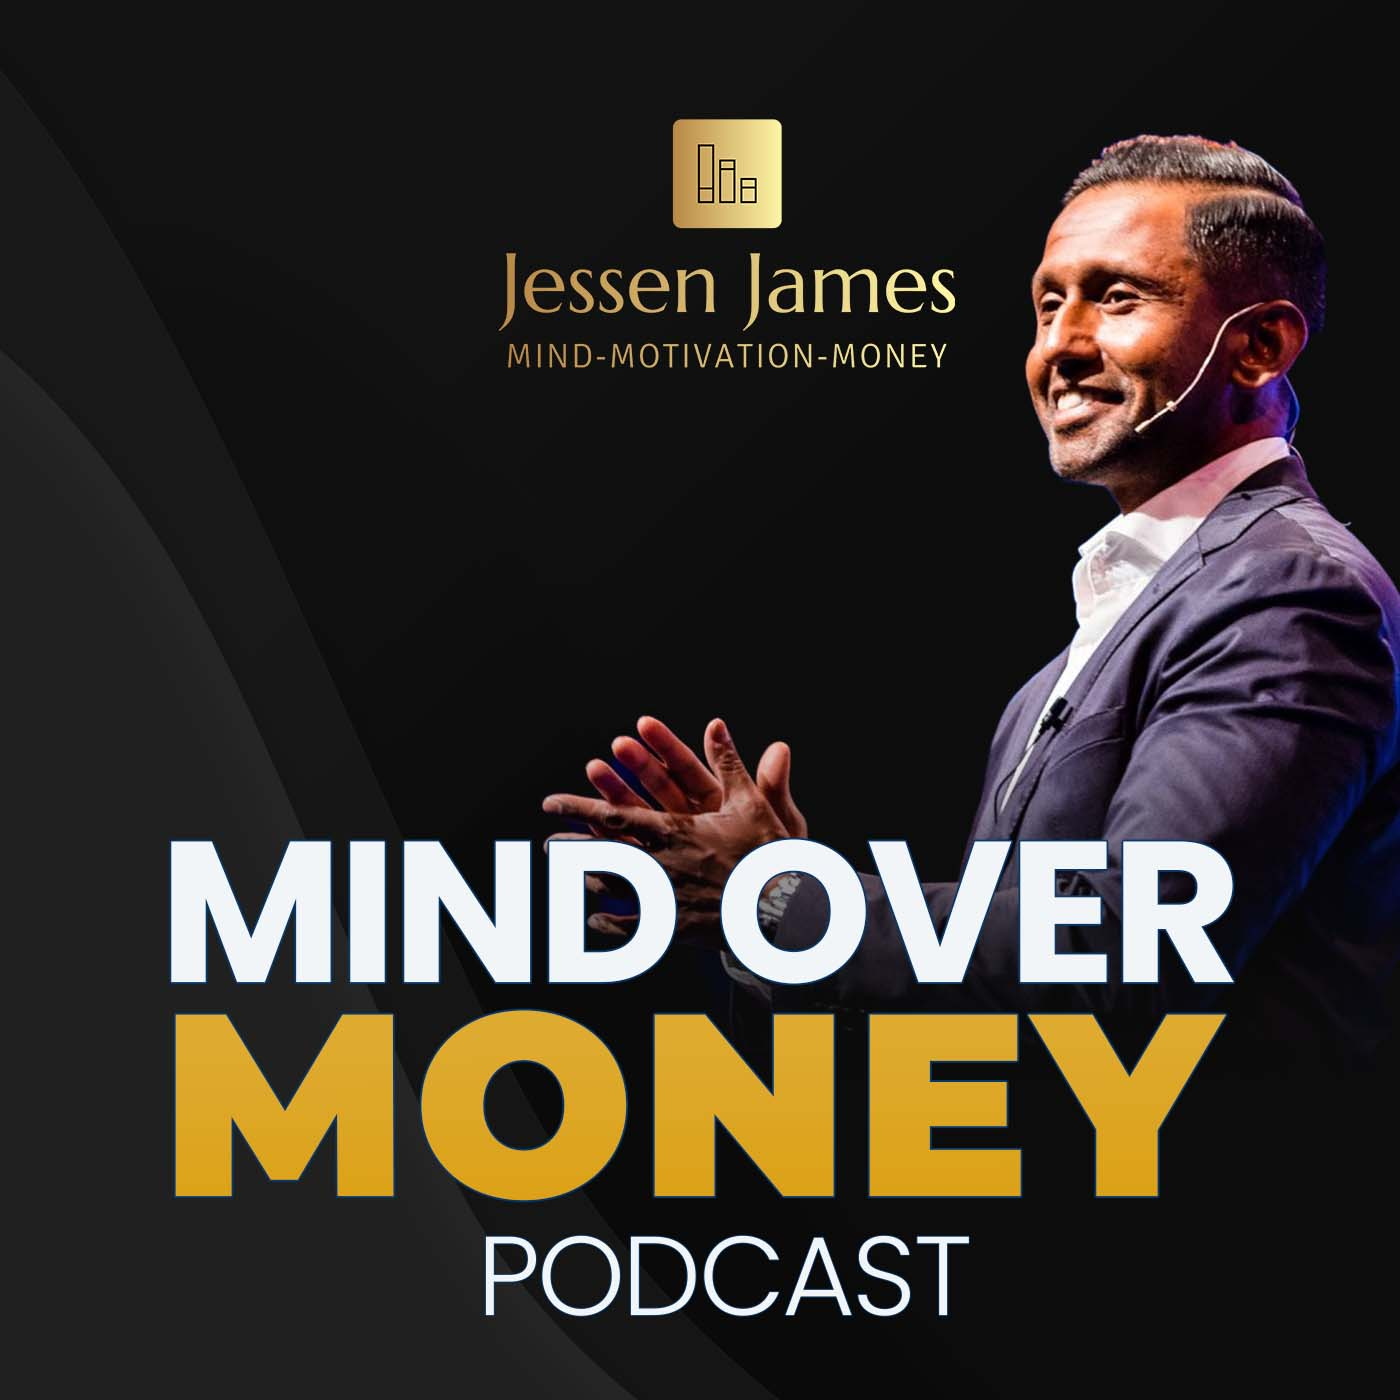 Unstoppable Money Mindset Part 3 - The 7 Key Laws Of Business